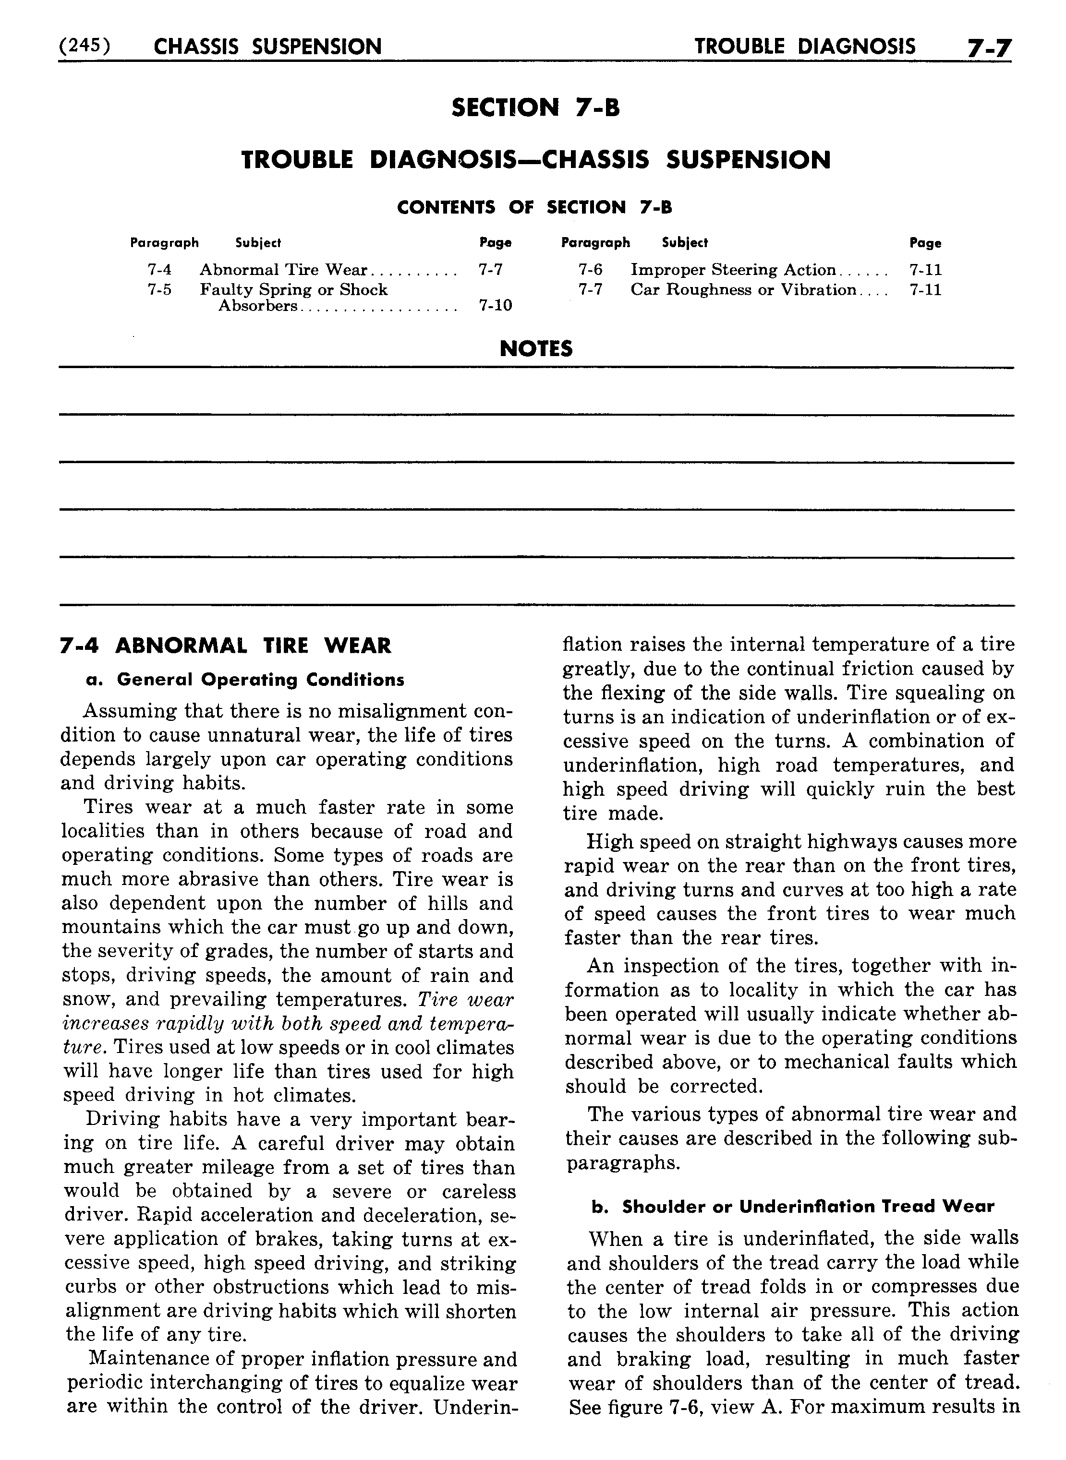 n_08 1956 Buick Shop Manual - Chassis Suspension-007-007.jpg